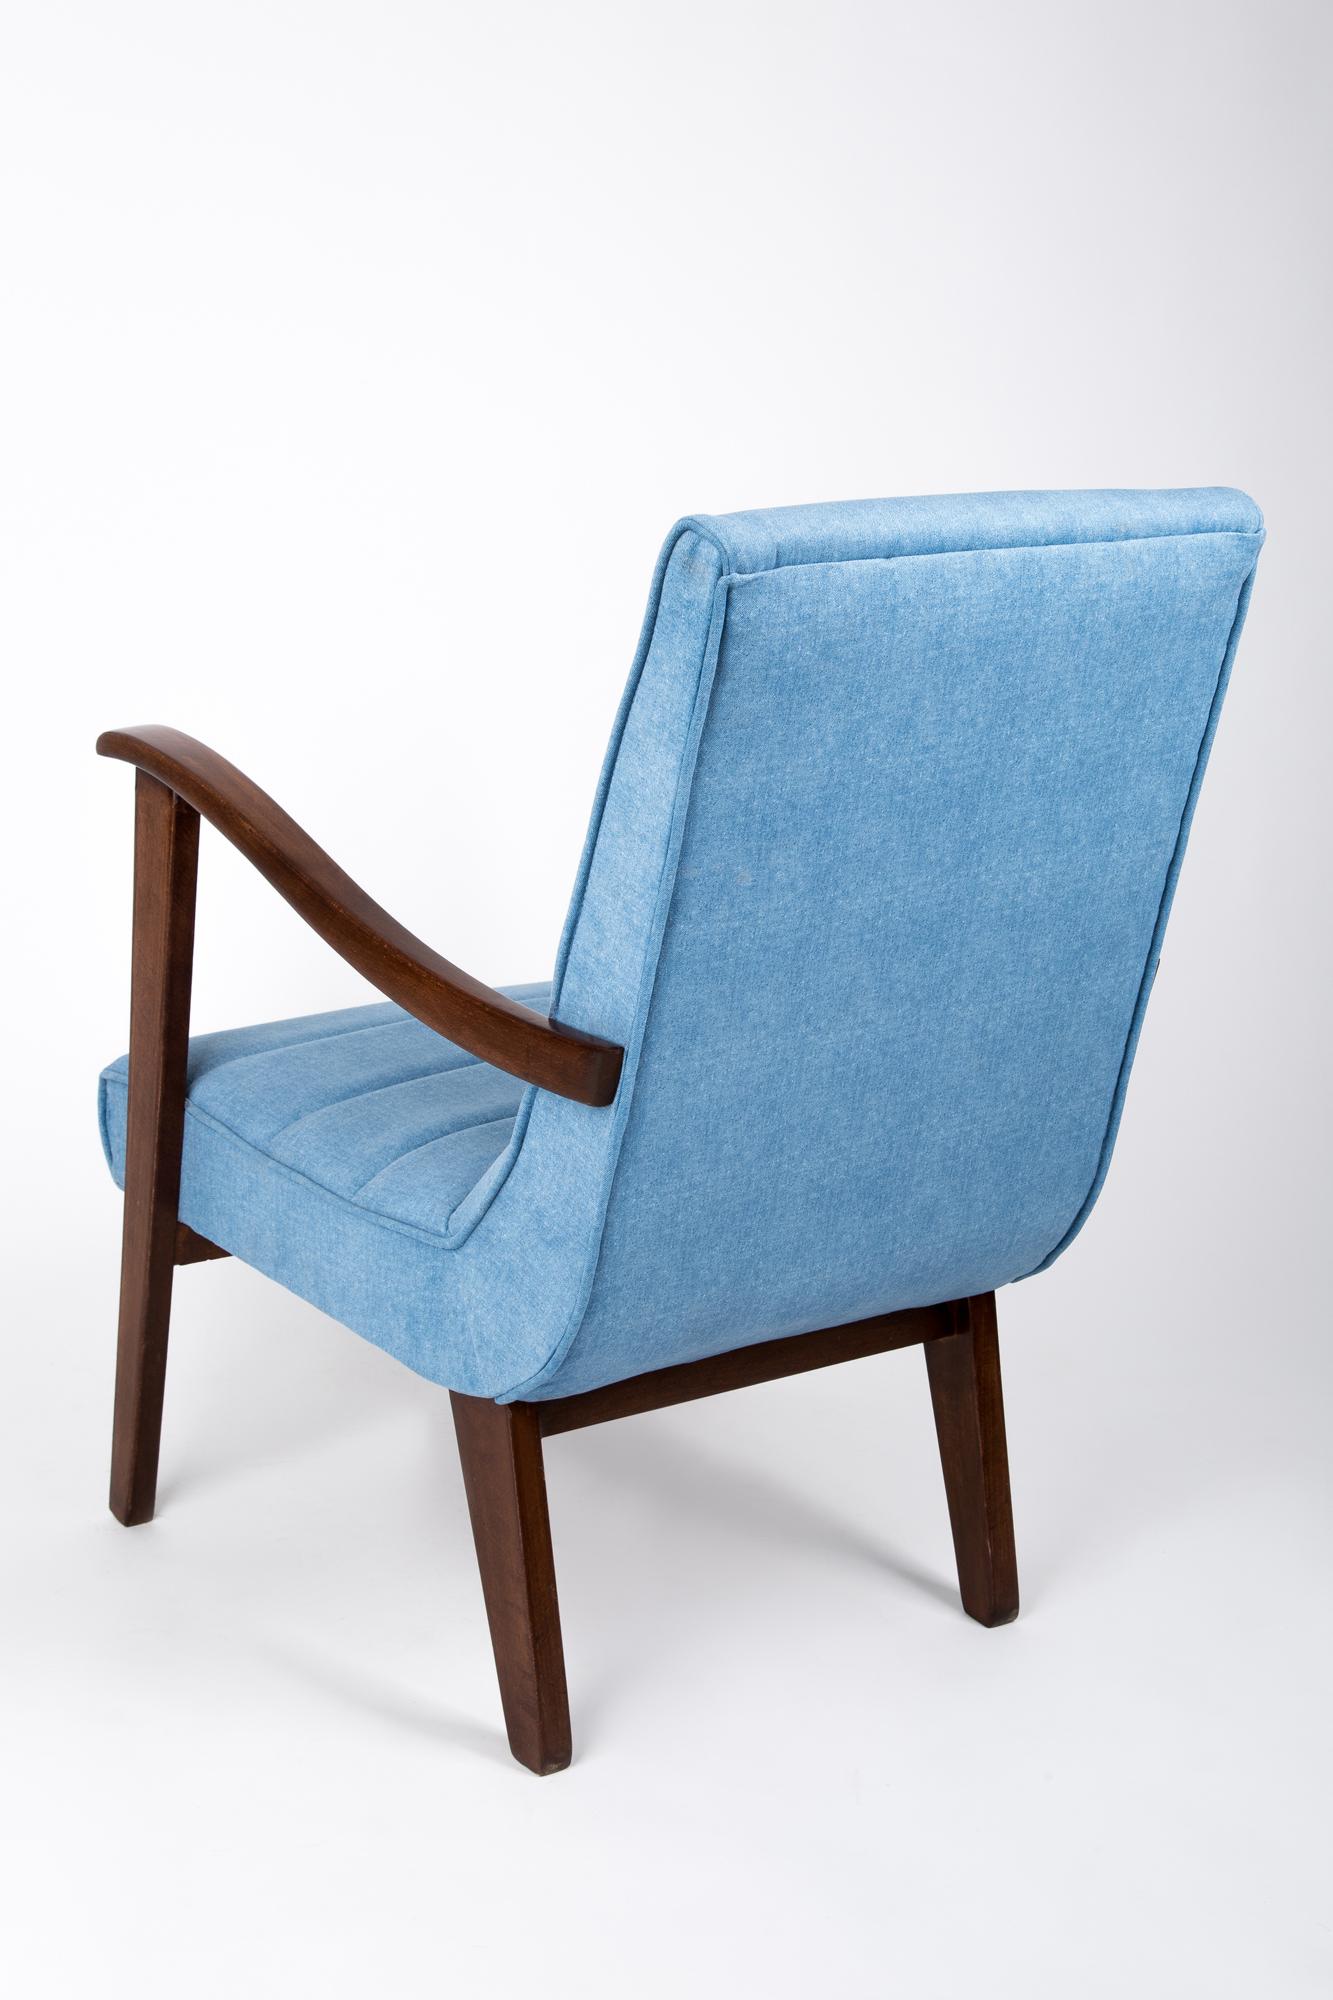 Mid-Century Modern Blue Armchair by Prudnik Furniture Factory, Poland, 1960s For Sale 1